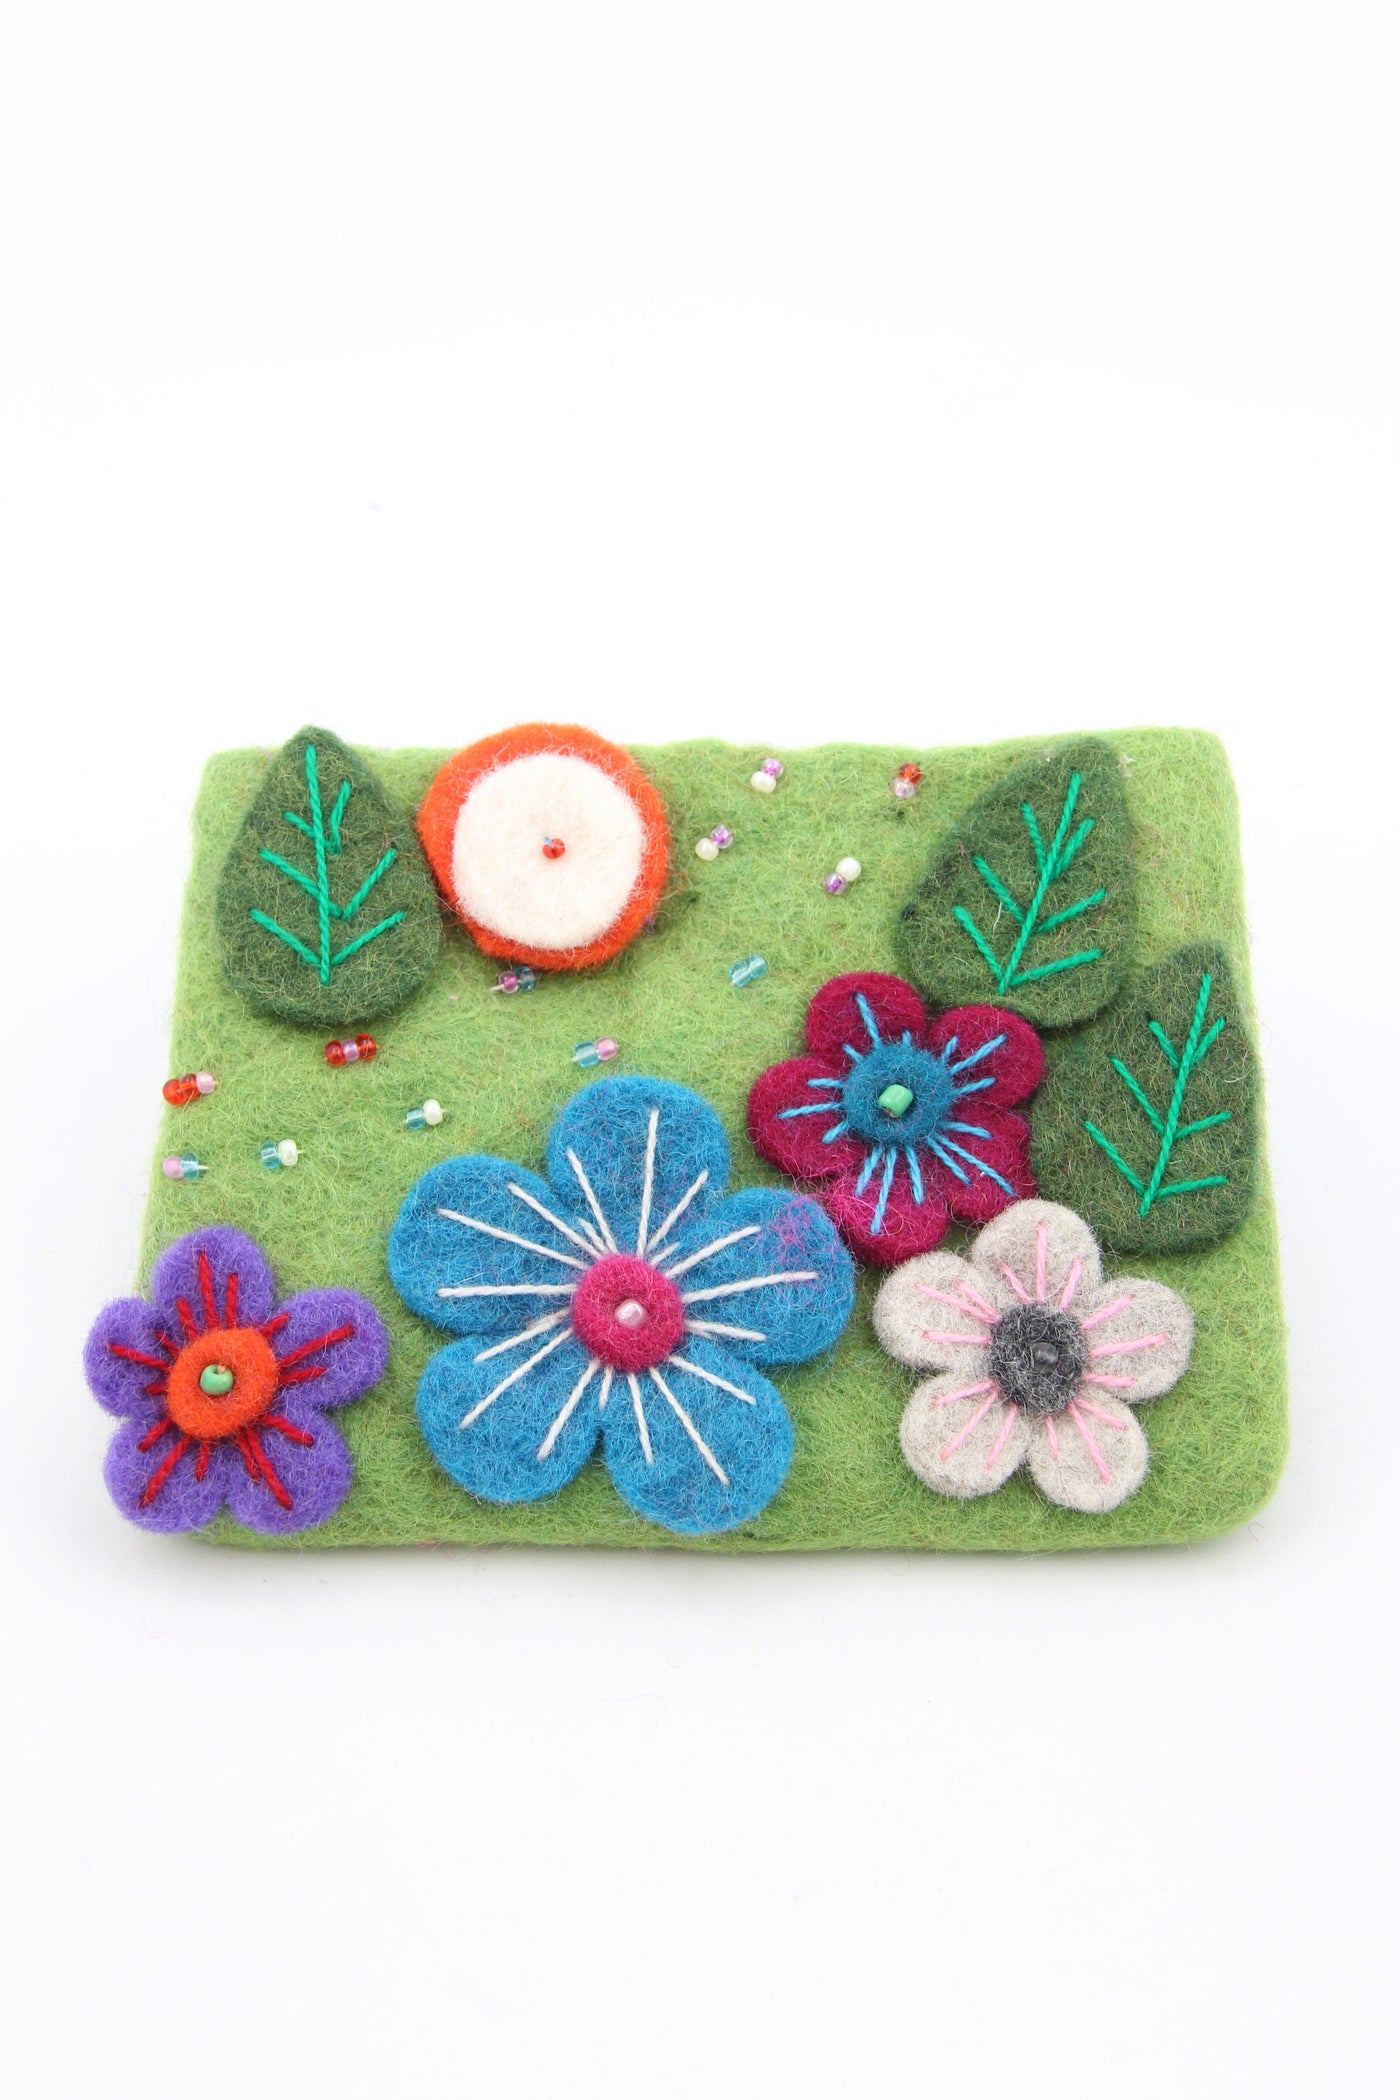 Green Floral Felted Wool Pouch, Coin Purse w/ Zipper, Fair Trade from Nepal